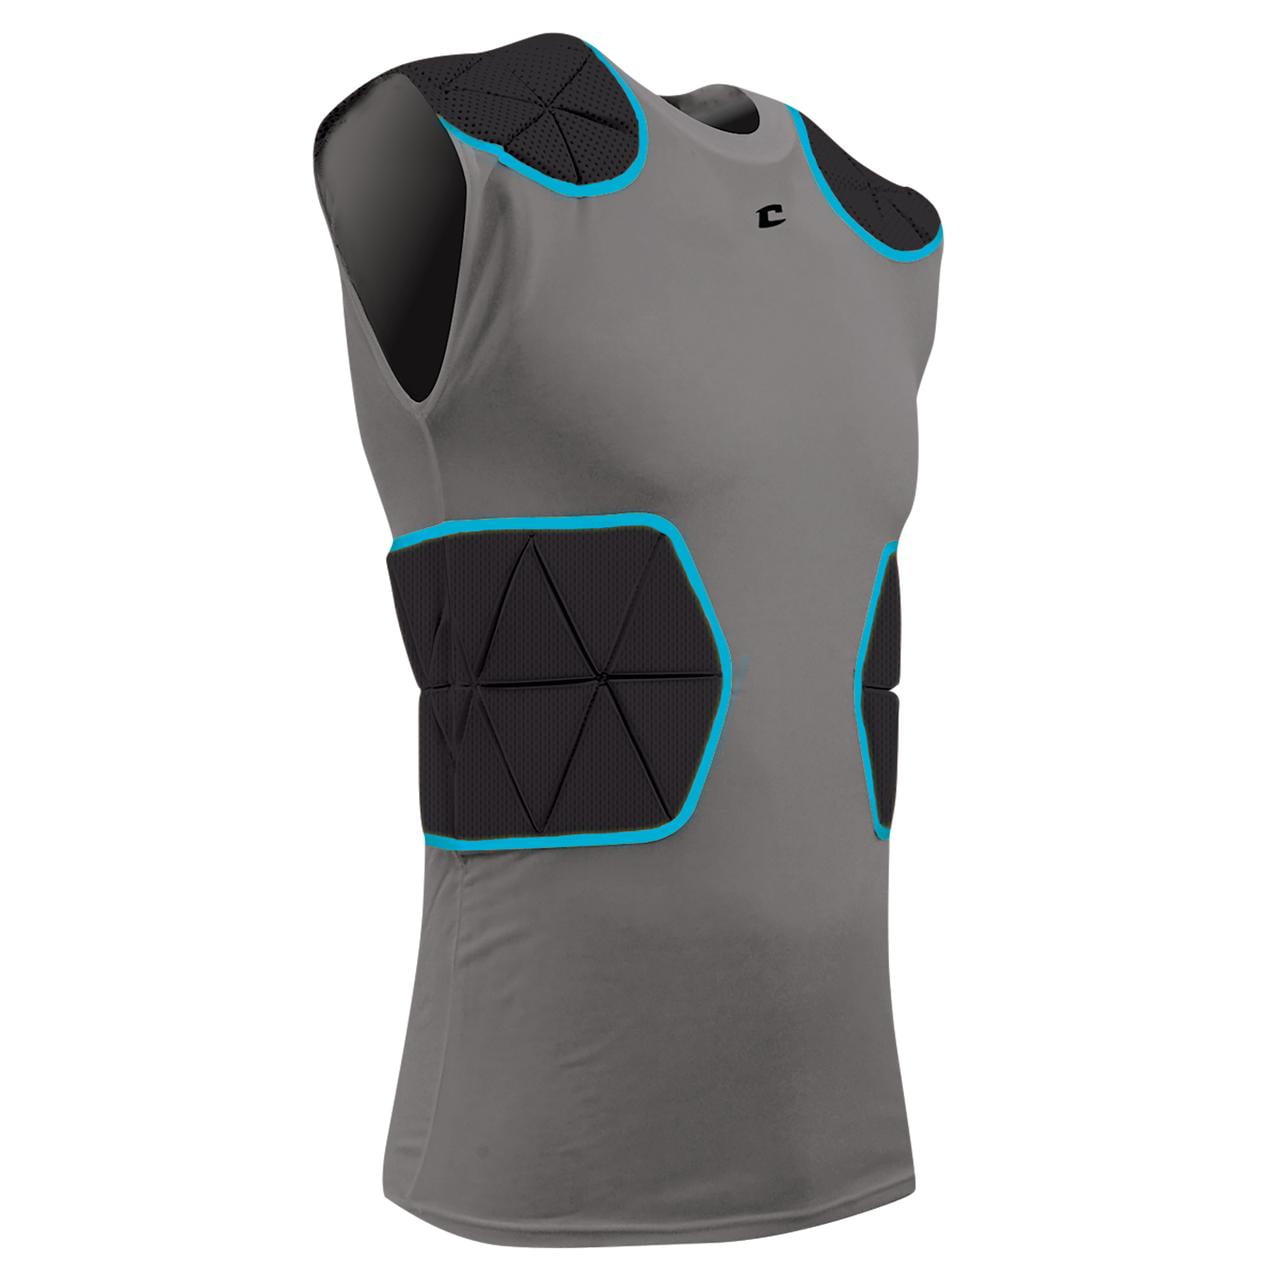 By EliteTek Compression Shirt CPS14 Youth & Adult Sizes Padded All Sports 